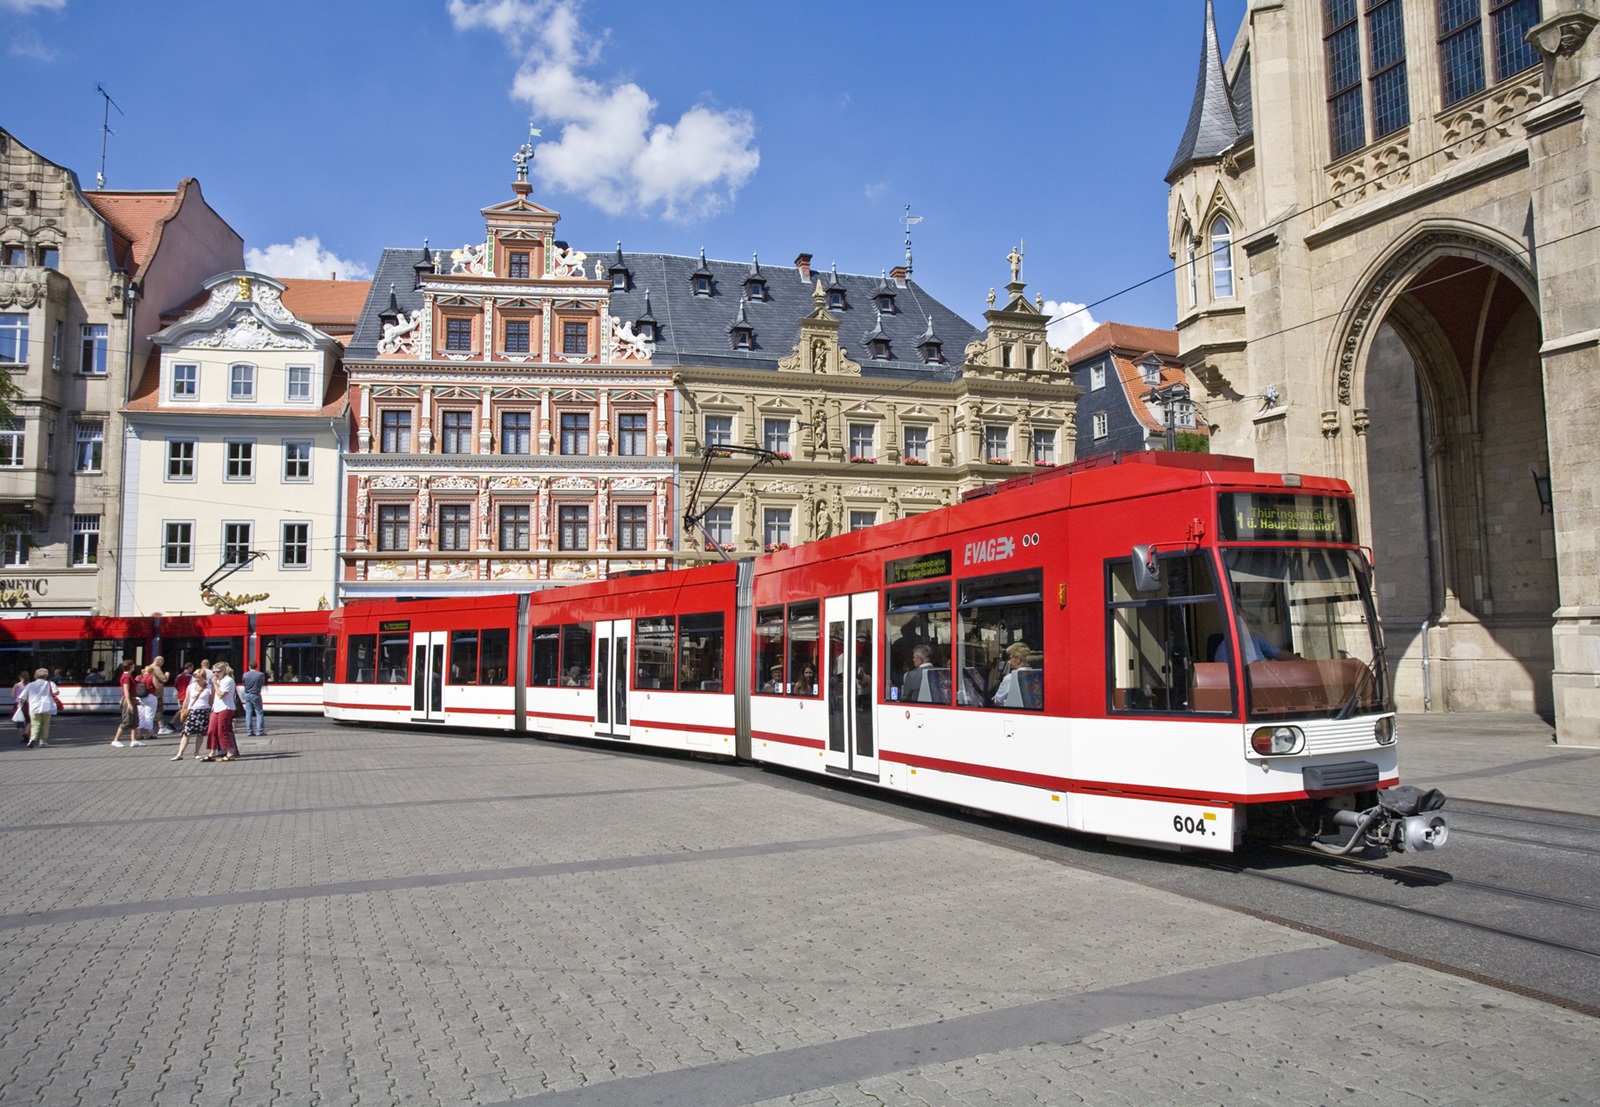 Streetcar on main square in Erfurt, Thuringia, Germany, Europe,Image: 43152329, License: Rights-managed, Restrictions: , Model Release: no, Credit line: Andrew Rubtsov / imageBROKER / Profimedia